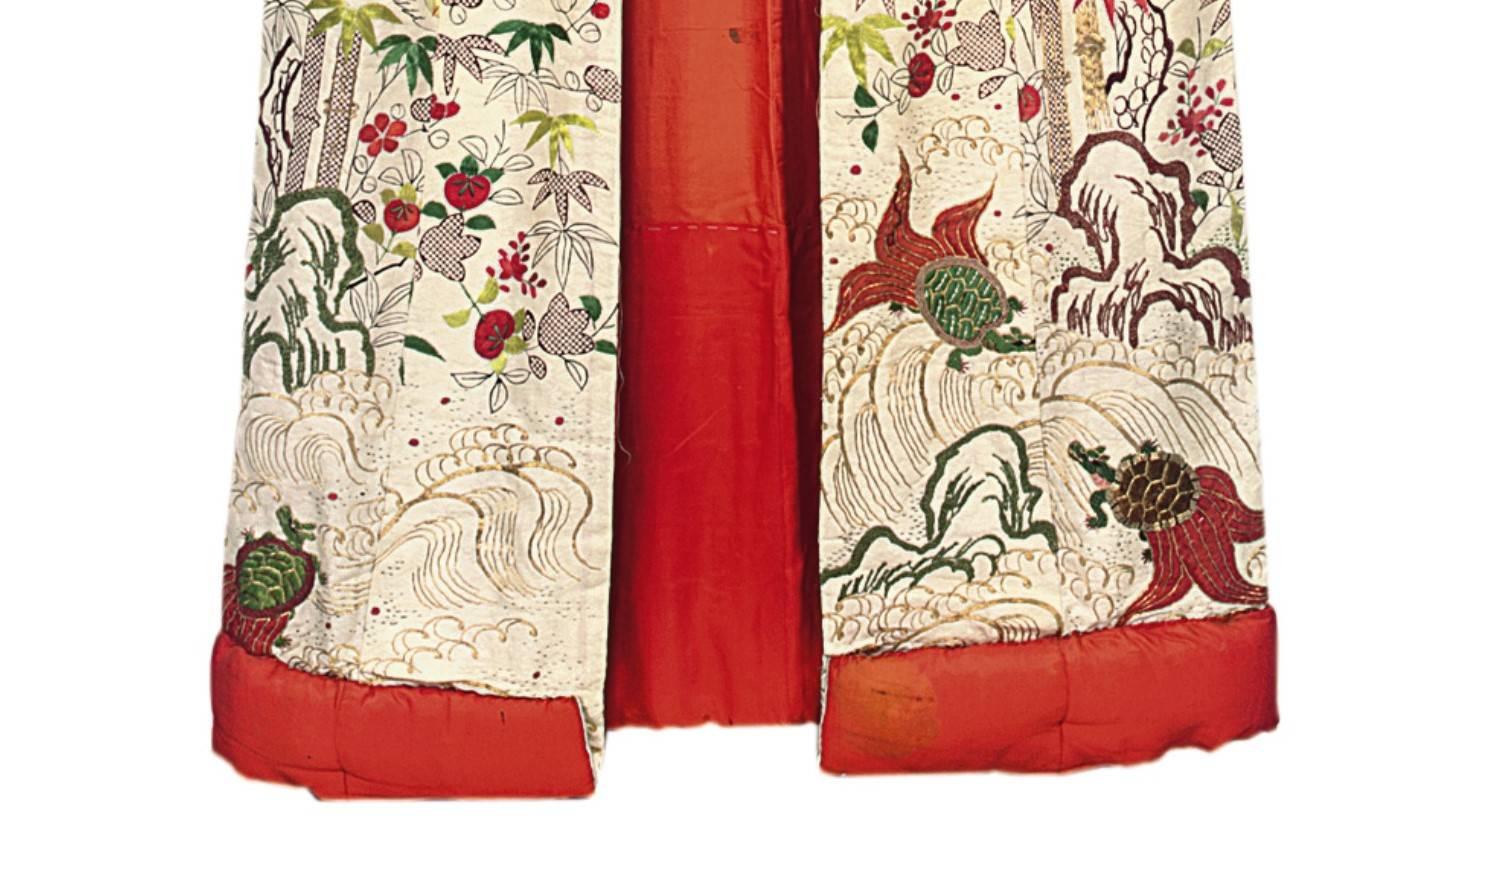 A furisode [wedding kimono],
Edo period, (Early 20th century).
Printed and embroidered with Ishibori leaves and red embroidered
plum blossom, with padded hem and long sleeves. Measures: 130 x 160cm.
 